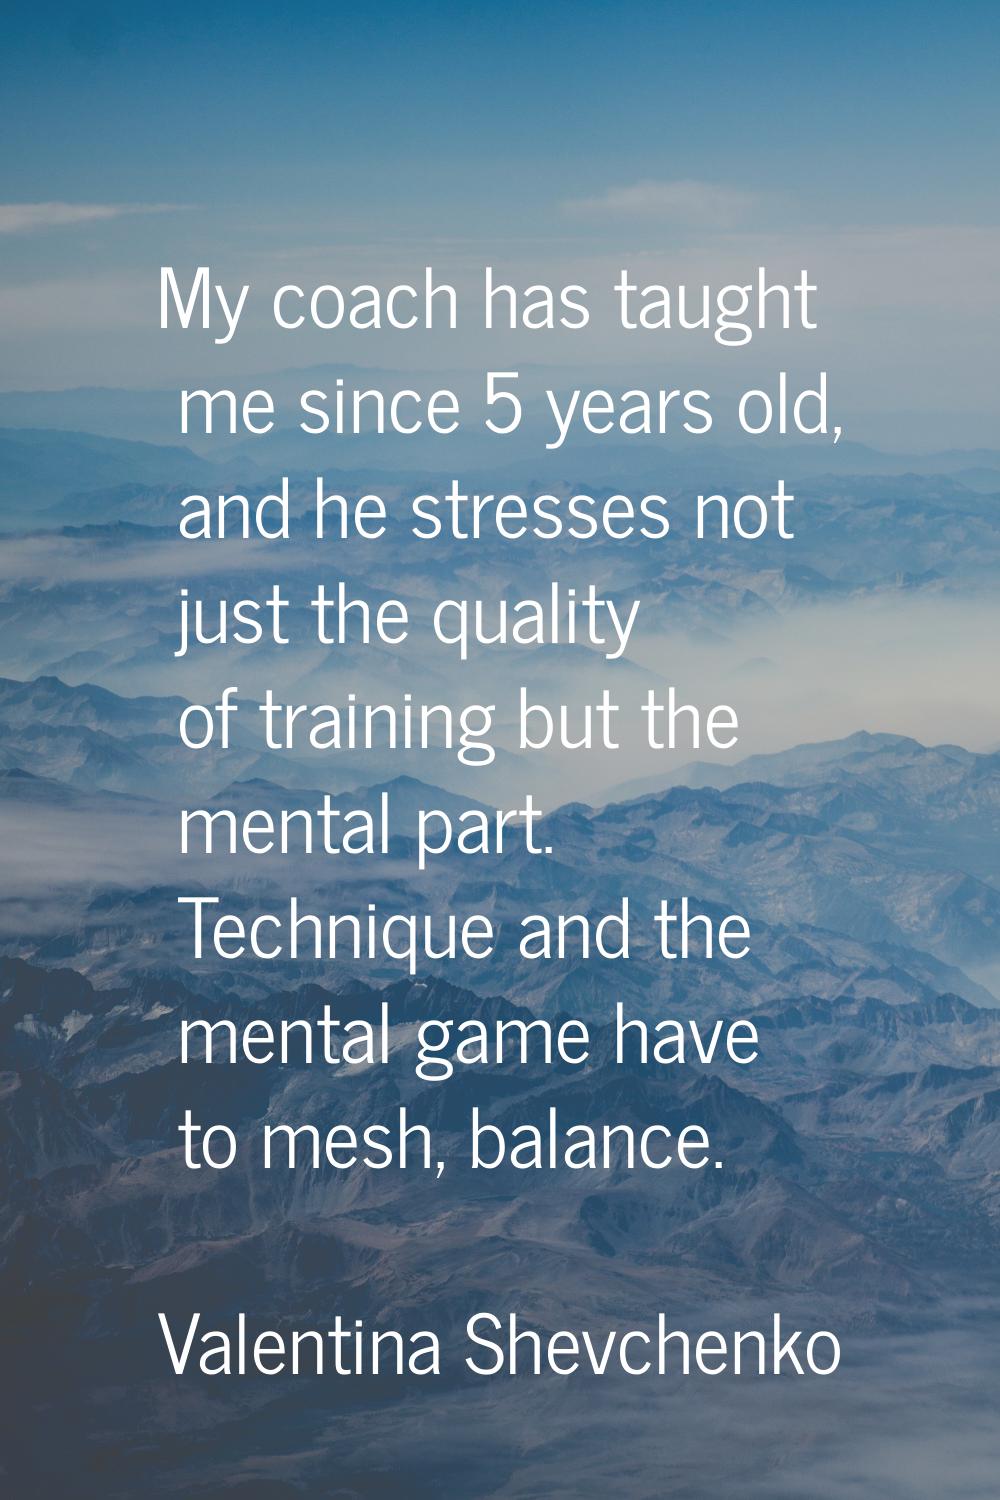 My coach has taught me since 5 years old, and he stresses not just the quality of training but the 